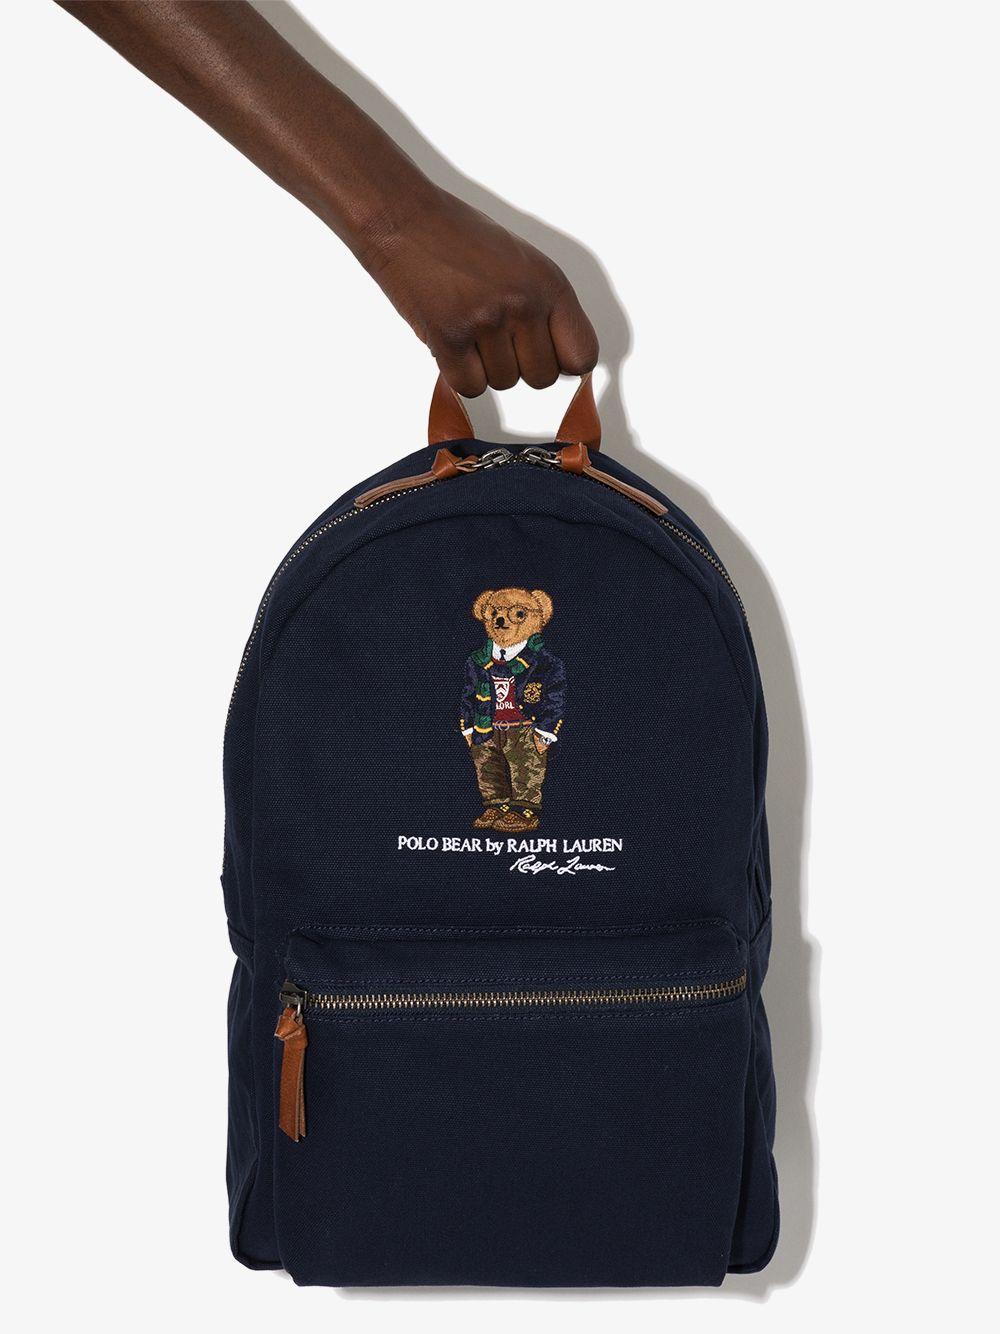 Polo Ralph Lauren Polo Bear Cotton Backpack in Blue for Men - Lyst